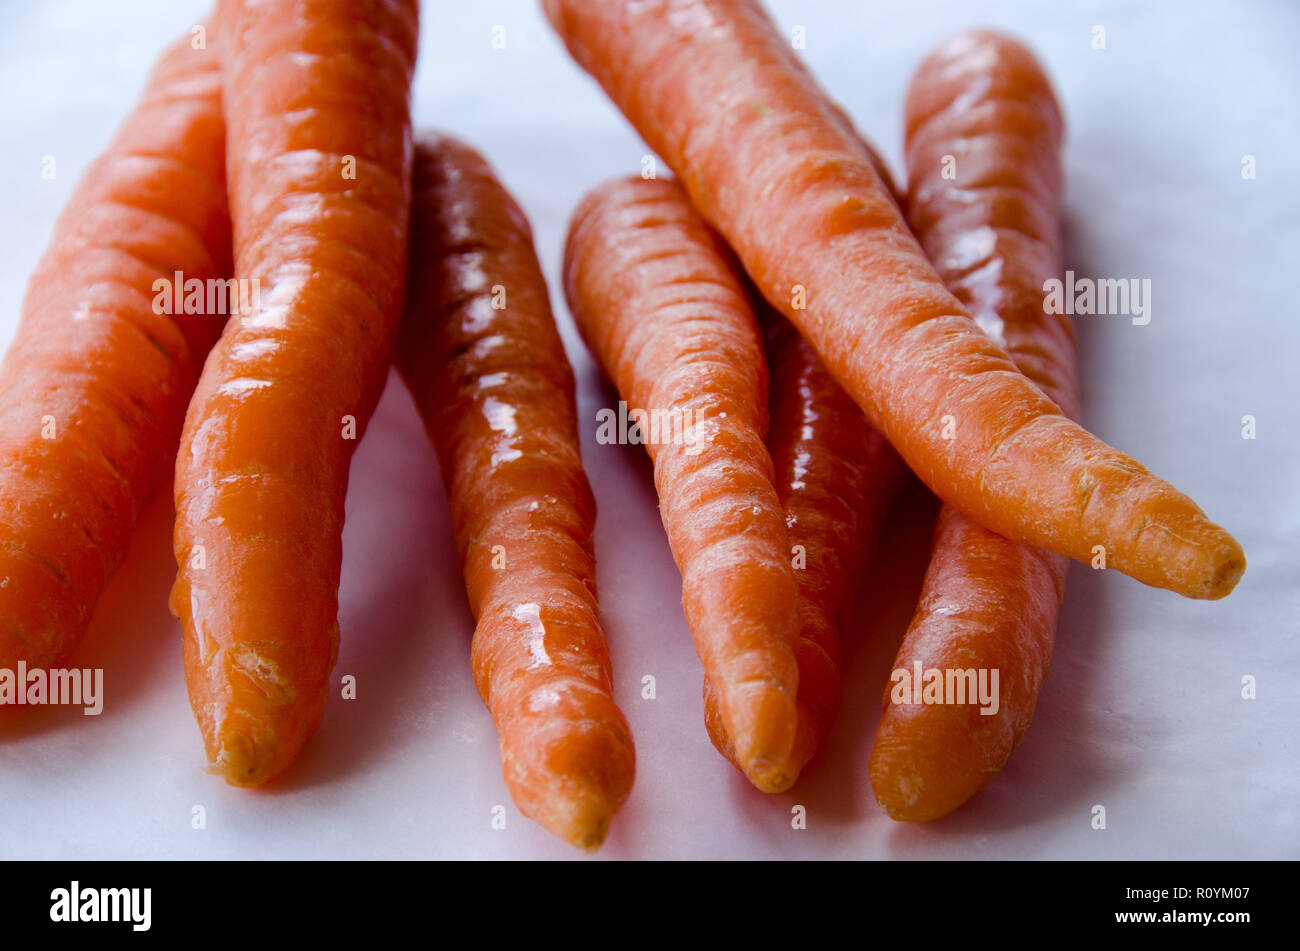 Carrots in group on white background Stock Photo